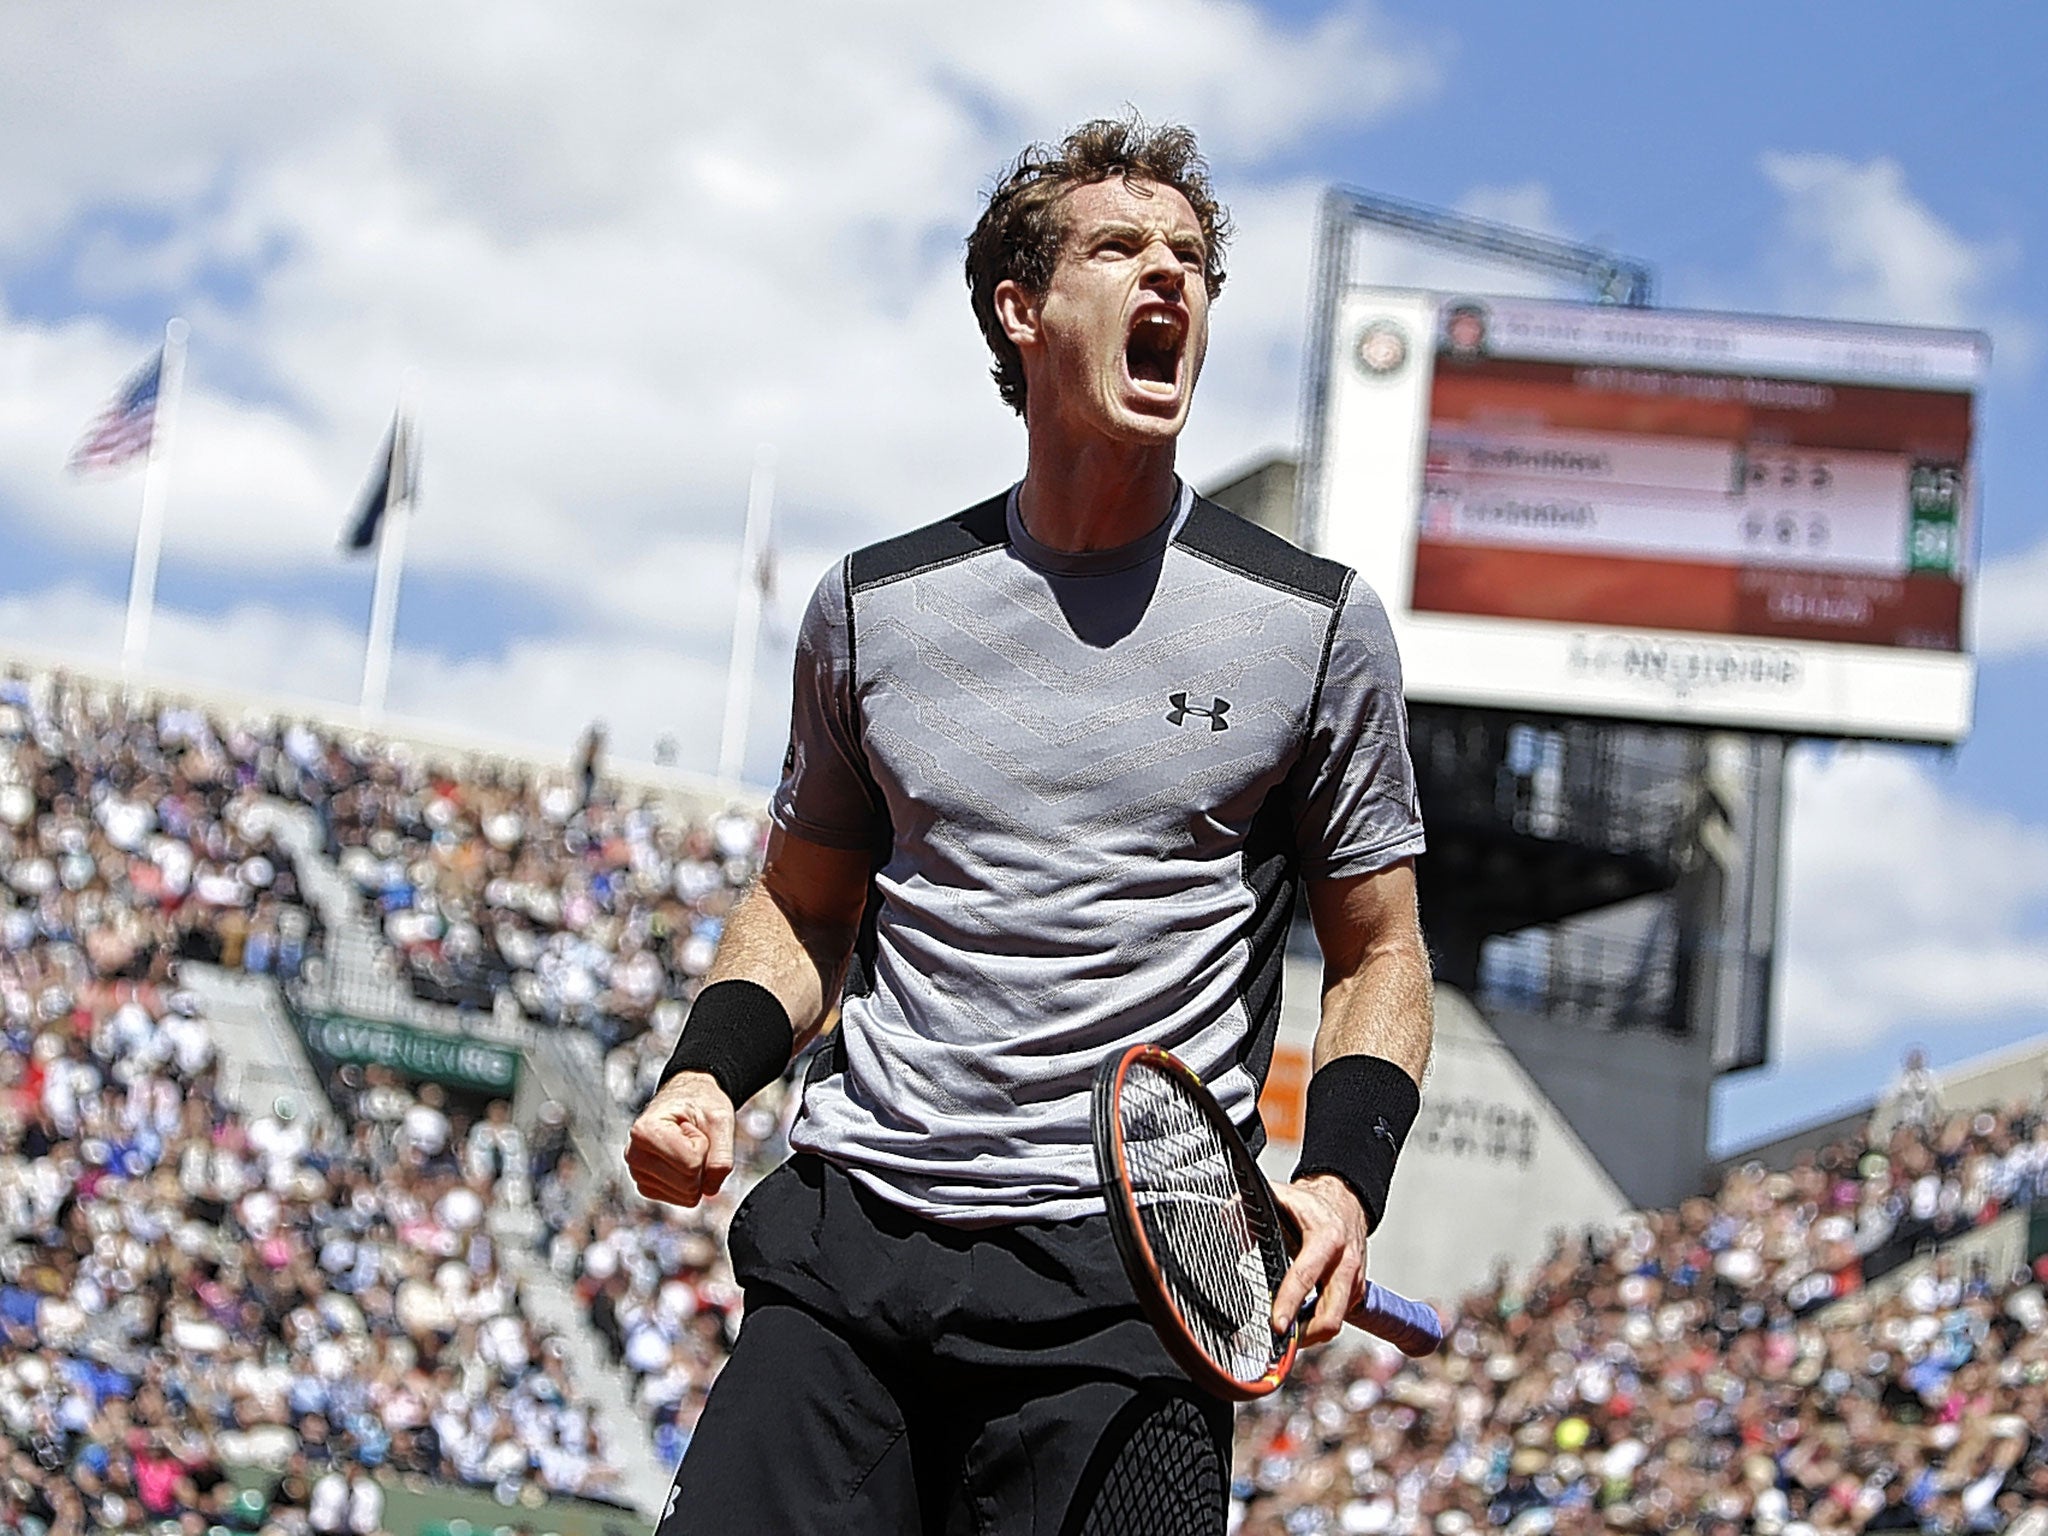 Andy Murray celebrates after beating Jeremy Chardy in the French Open to reach the quarter-finals at Roland Garros